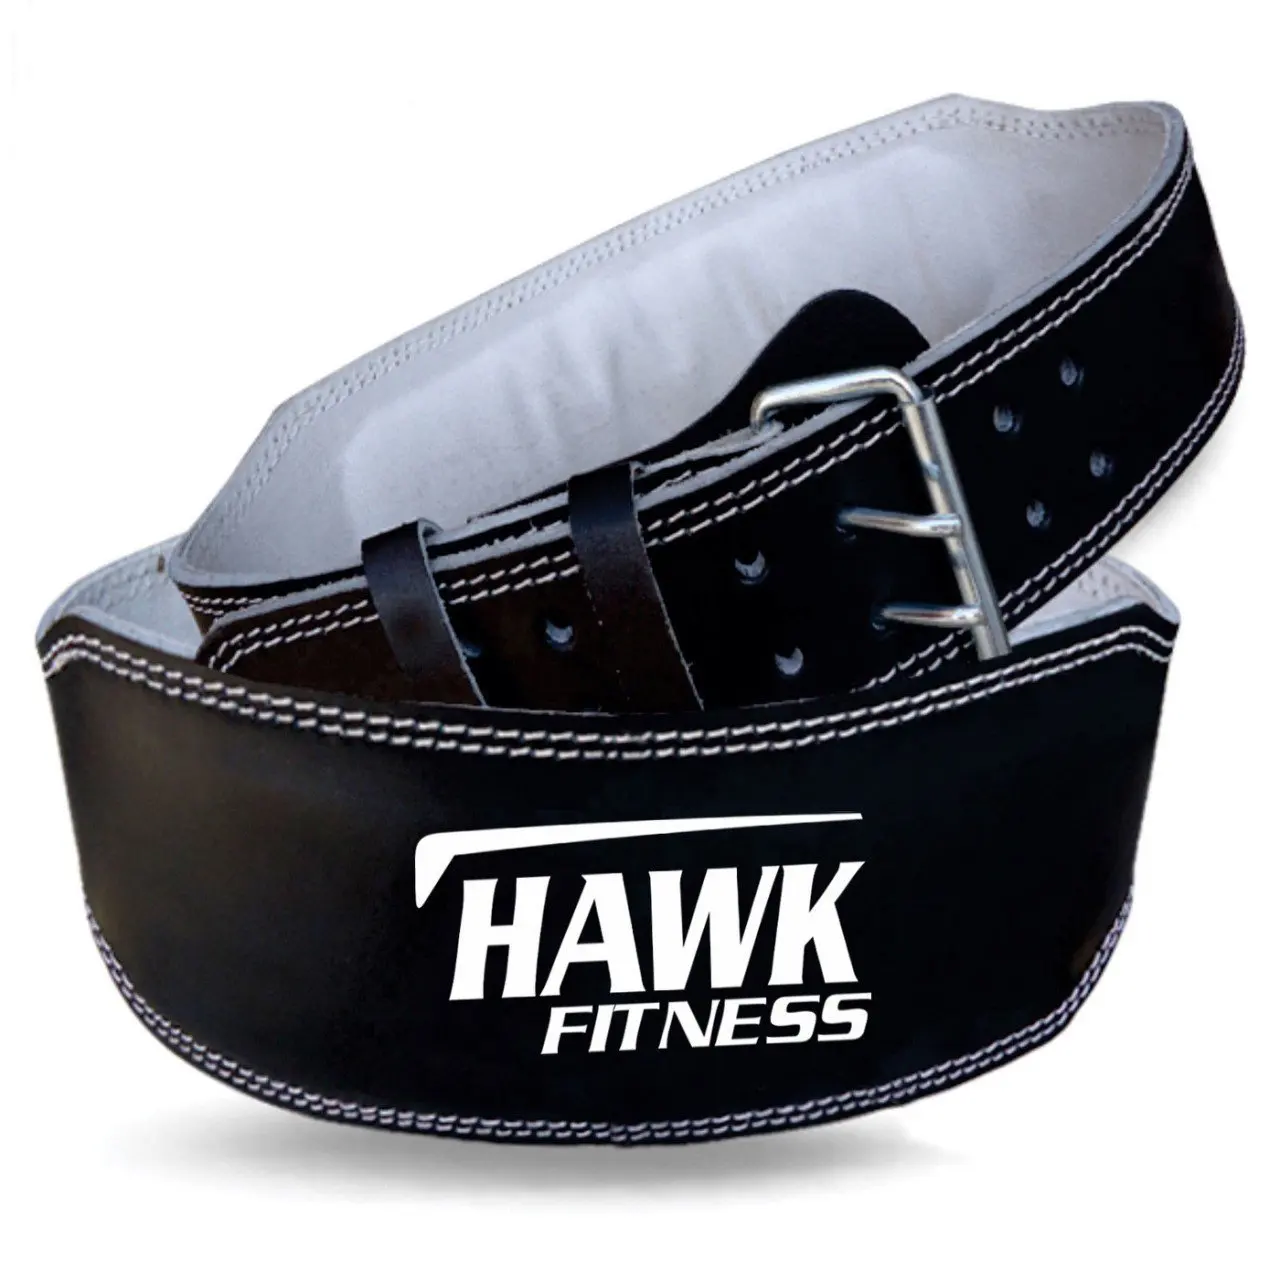 POWER WEIGHT LIFTING GYM TRAINING BODY BUILDING COWHIDE LEATHER PADDED BELT